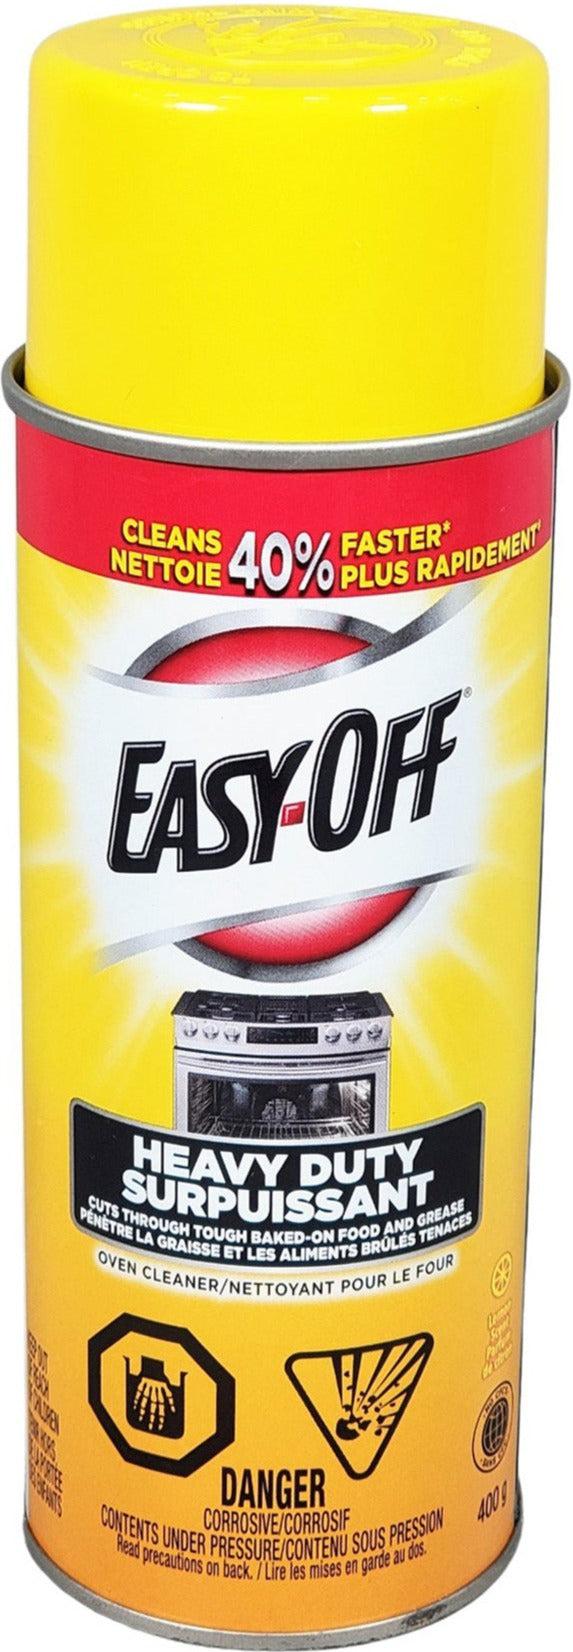 http://www.a1cashandcarry.com/cdn/shop/products/Easyoff-Oven-Cleaner-Heavy-Duty-Aerosol-Janitorial-Easyoff-Easyoff-Oven-Cleaner-Heavy-Duty-Aerosol-Janitorial-Easyoff-CHM089_A_c03aa487-079d-4f37-a397-11f2bd662315.jpg?v=1670382550